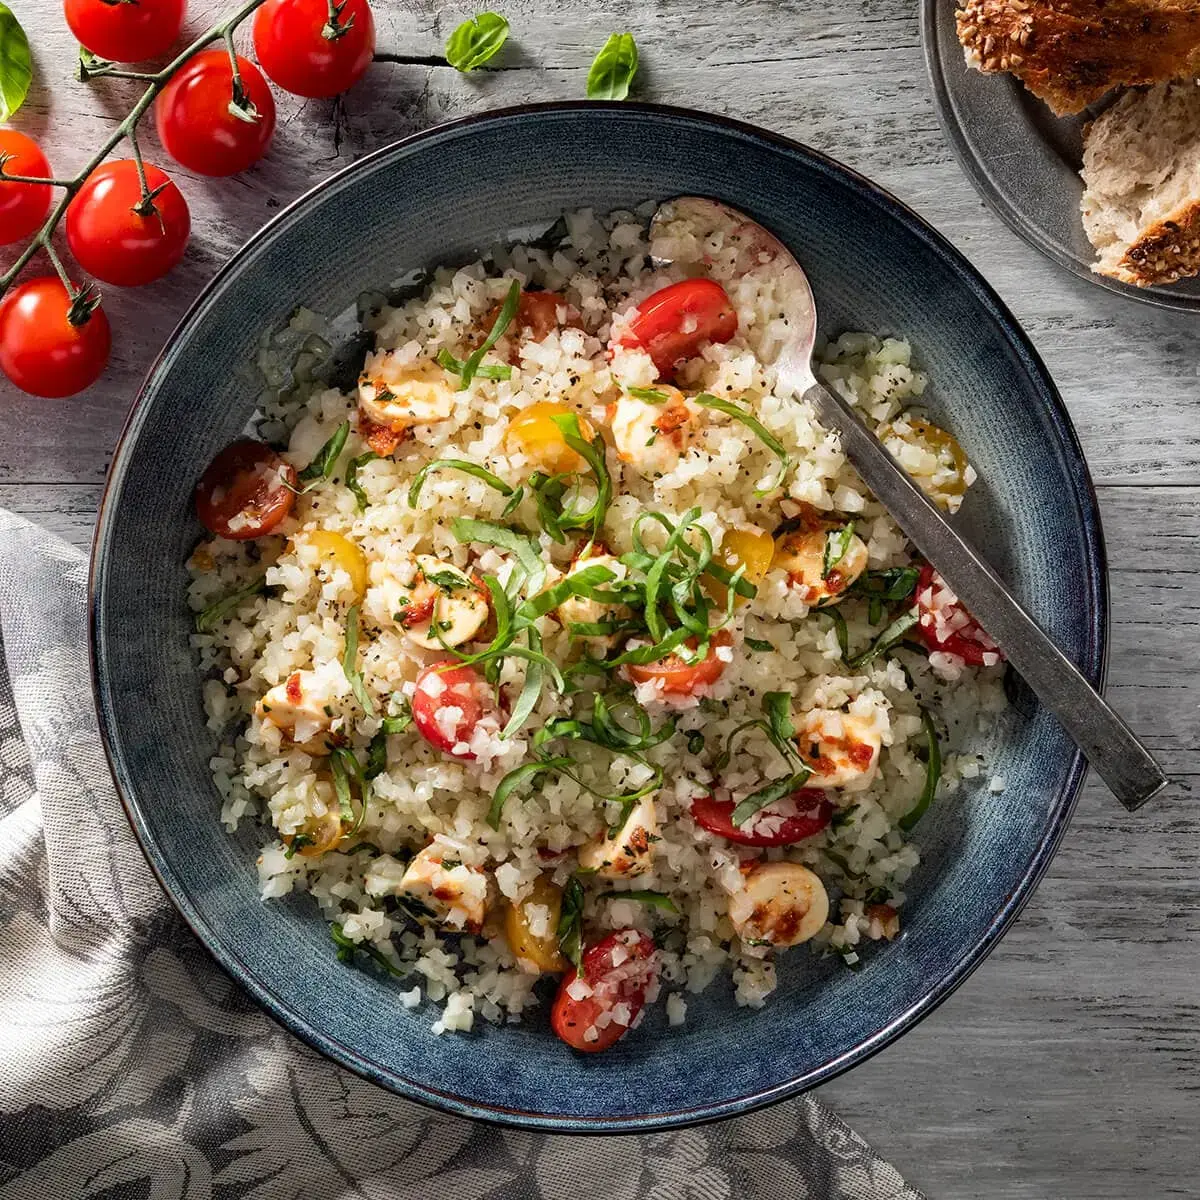  Simplot Simple Goodness™ Premium Vegetables Riced Cauliflower with tomatoes in a bowl